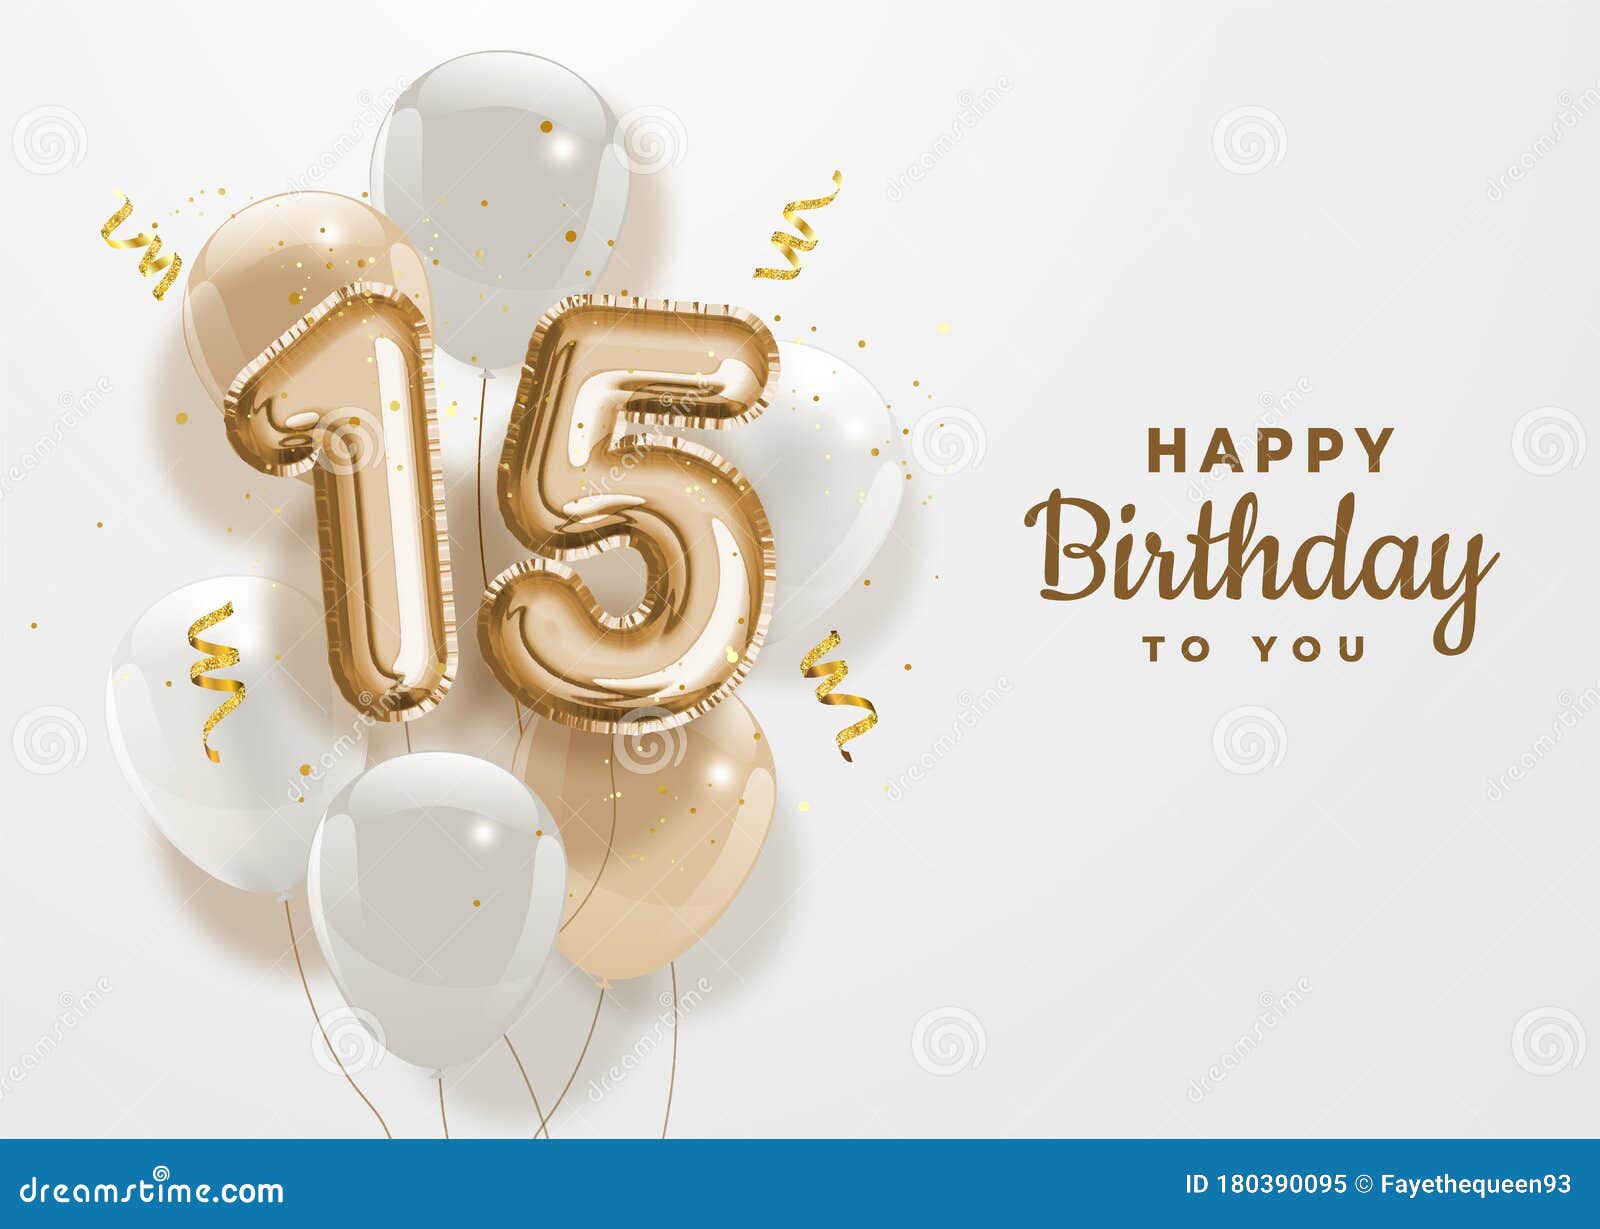 Happy 15th Birthday Gold Foil Balloon Greeting Background. Stock Vector - Illustration of golden, happy: 180390095